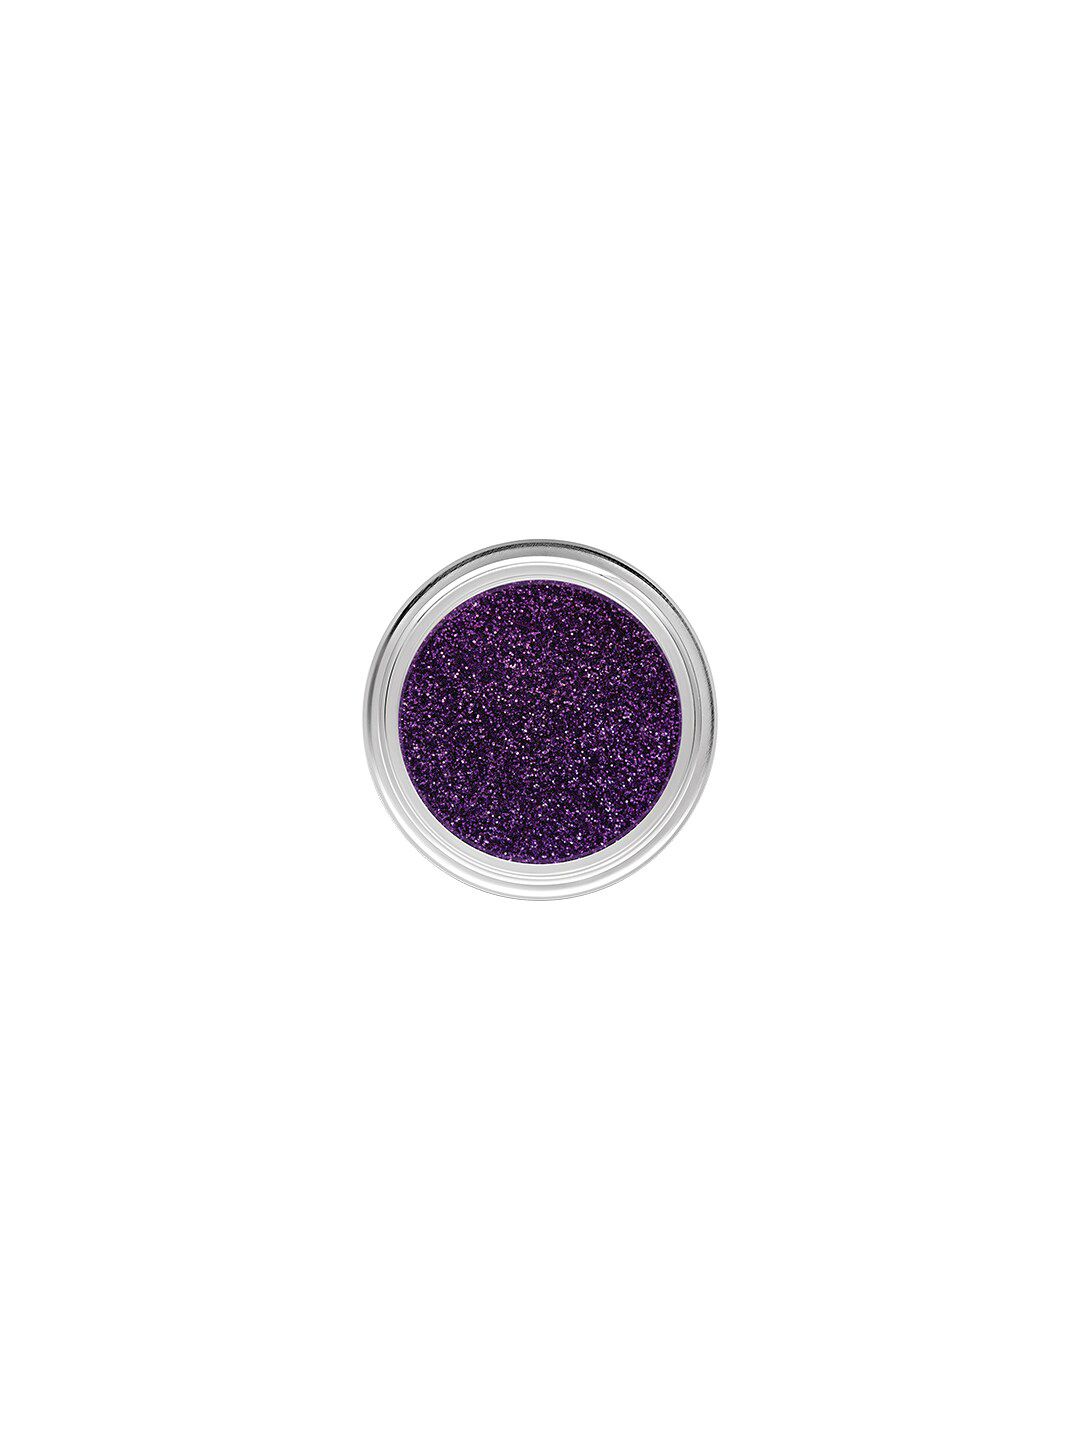 C2P PROFESSIONAL MAKEUP Uptown Loose Glitters - Violet Line 11 Price in India